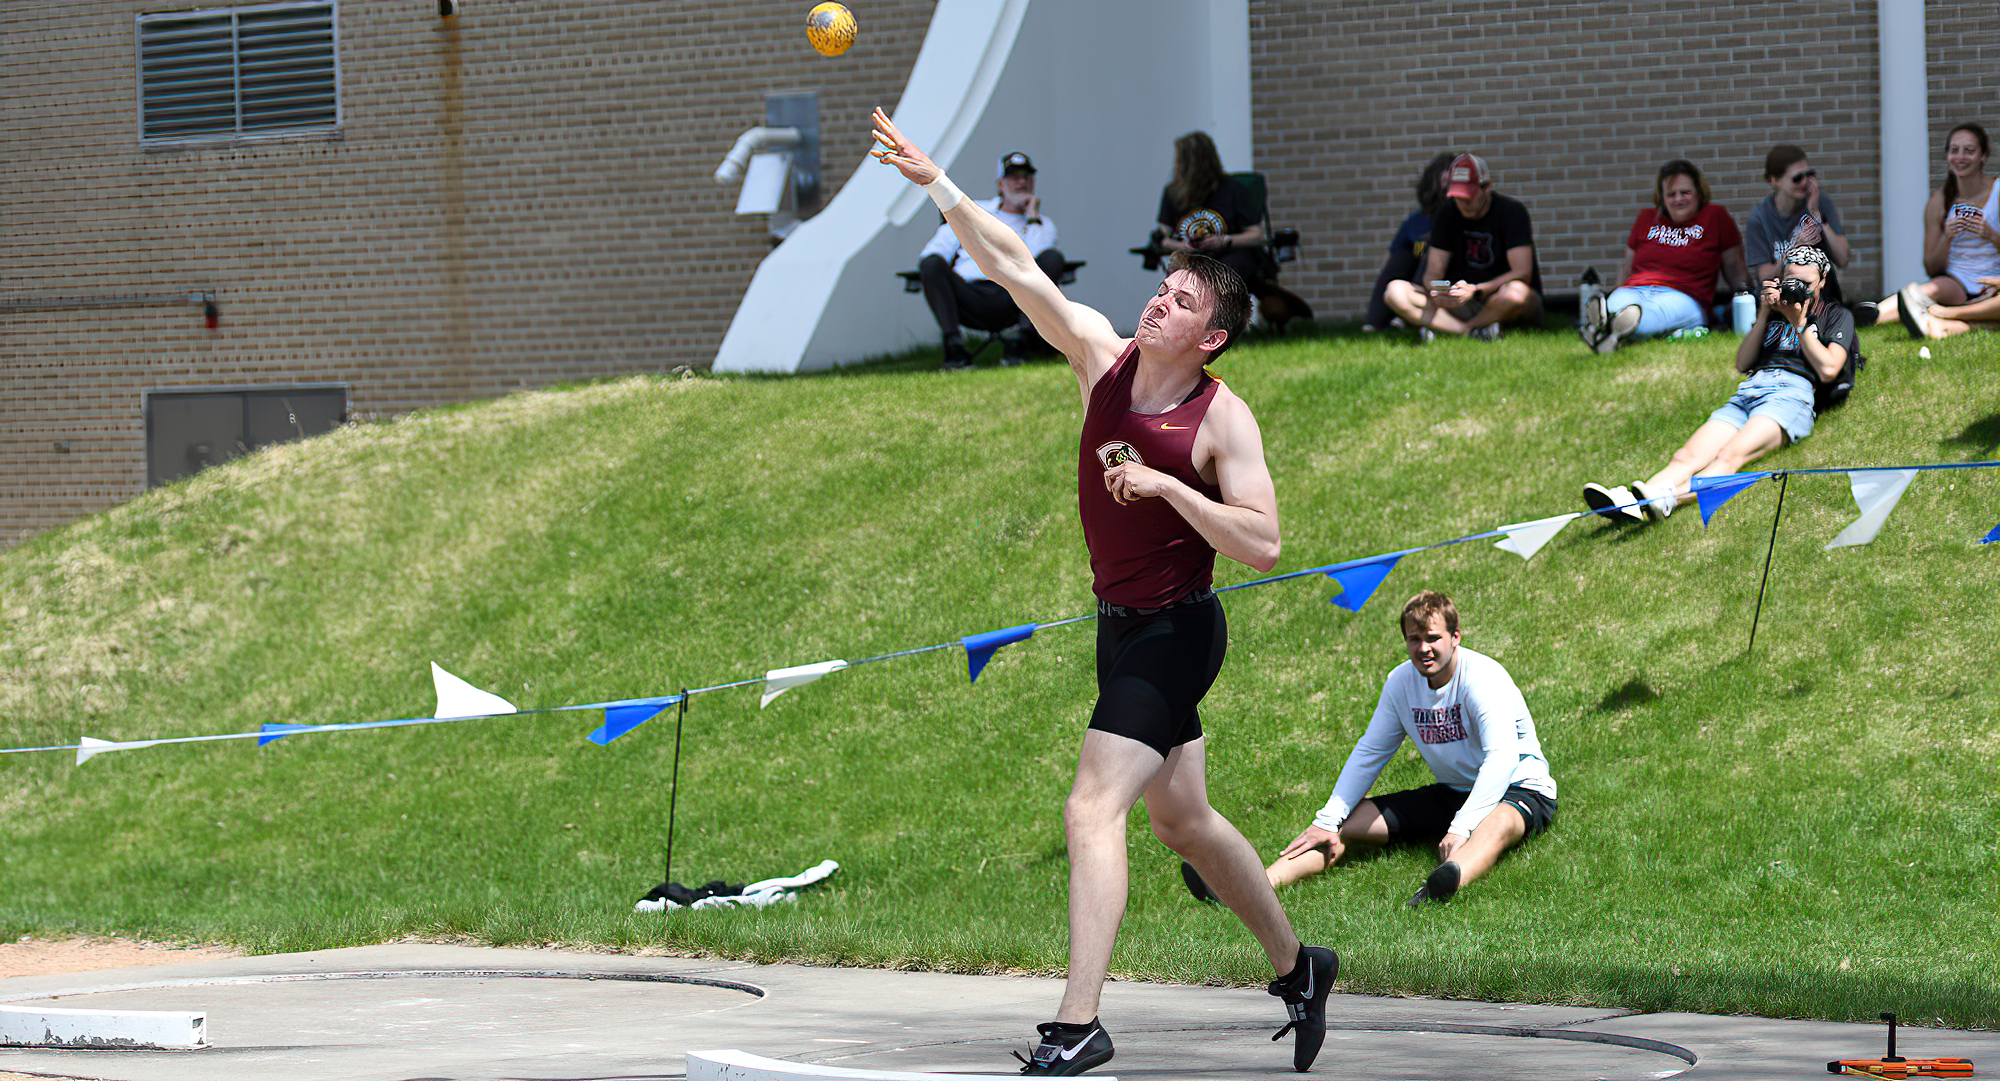 Wade Rhonemus lets go of the shot put during the first day of the MIAC decathlon competition. (Photo courtesy of the Carleton Sports Info Dept.)